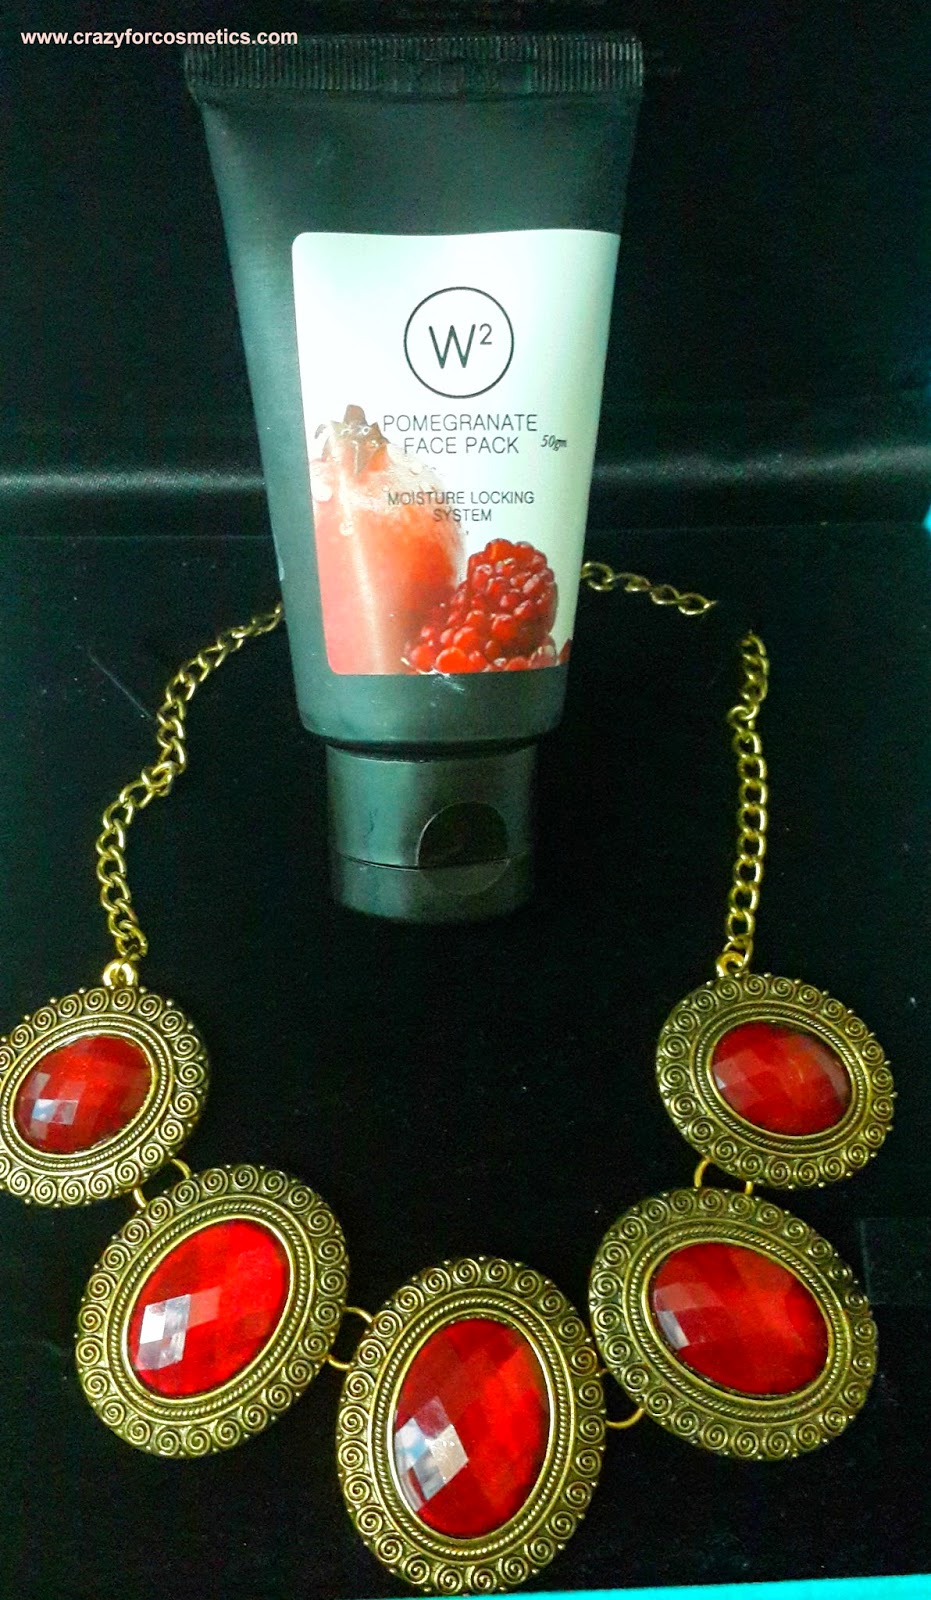  W 2 pomegranate face mask-W 2 pomegranate face mask review-jabong online shopping India-W2 products online India